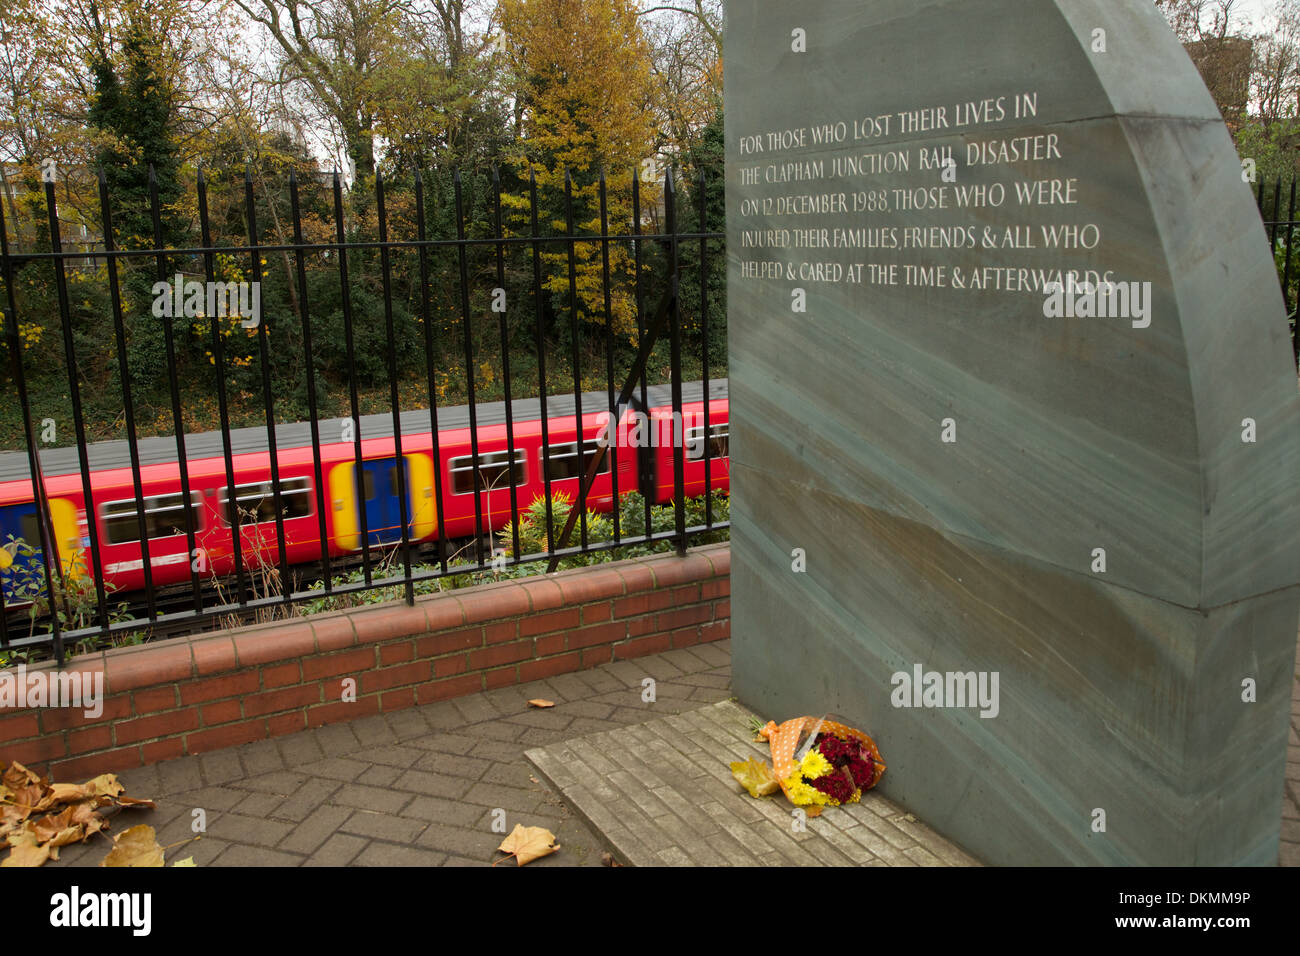 Flowers laid at the Clapham Junction rail disaster memorial mark the 25th anniversary of the accident on December 13 Stock Photo